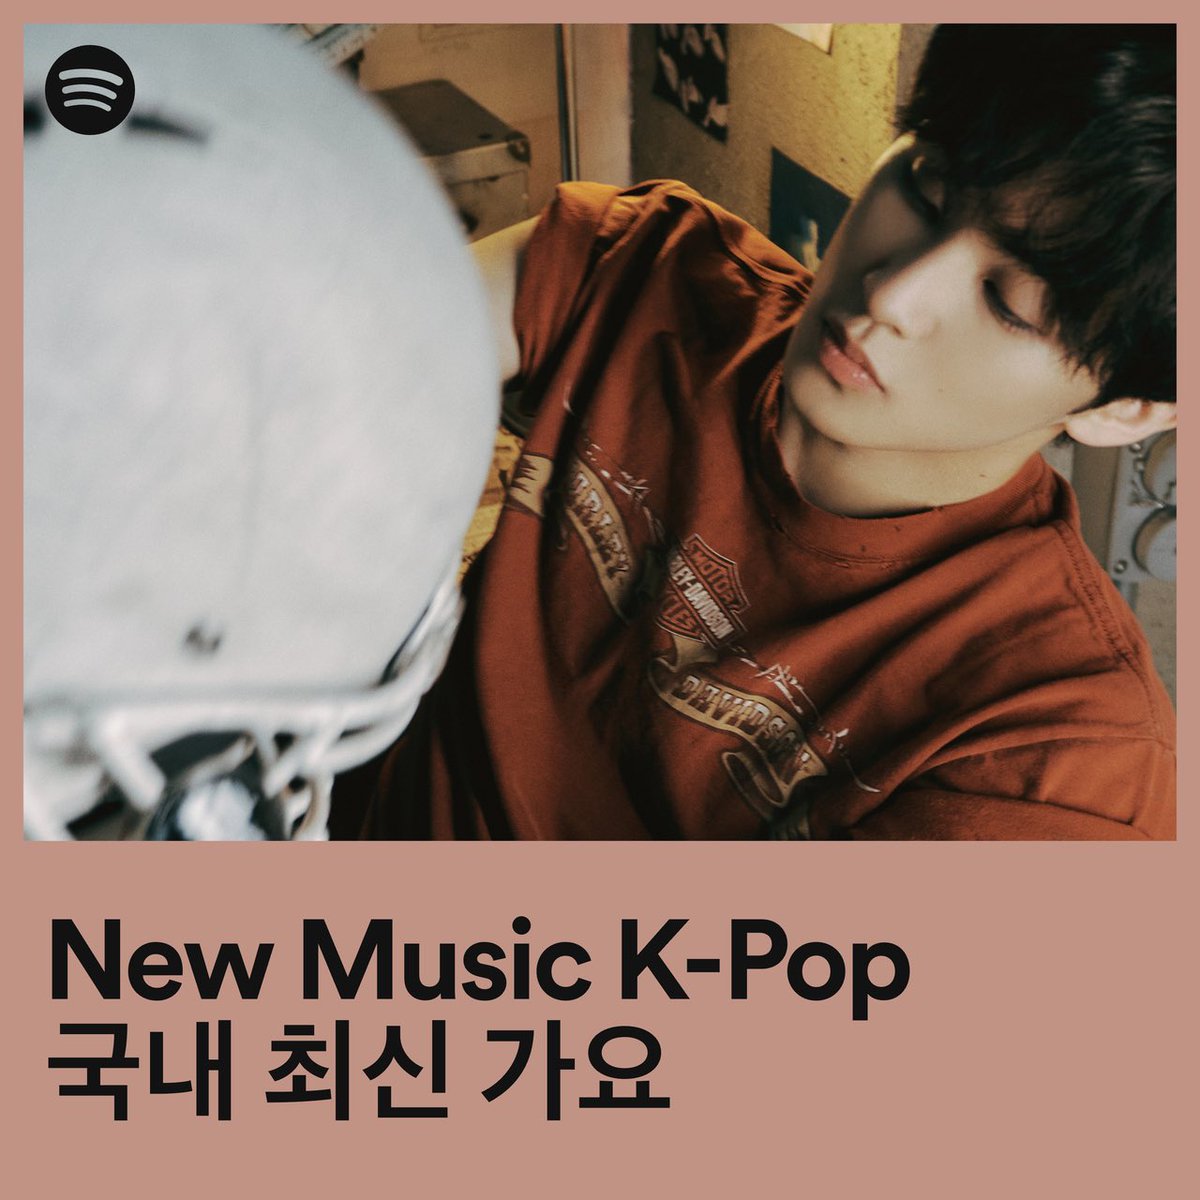 MARK is on the cover of New Music K-Pop on @Spotify 💚 Go check it out and listen to '200' right now! 🎧spoti.fi/4dIAjOq 🕸️spoti.fi/3K6c3Z9 #MARK #마크 #200 #MARK_200 #NCT #NCT127 #NCTDREAM @SpotifyKR @SpotifyKpop